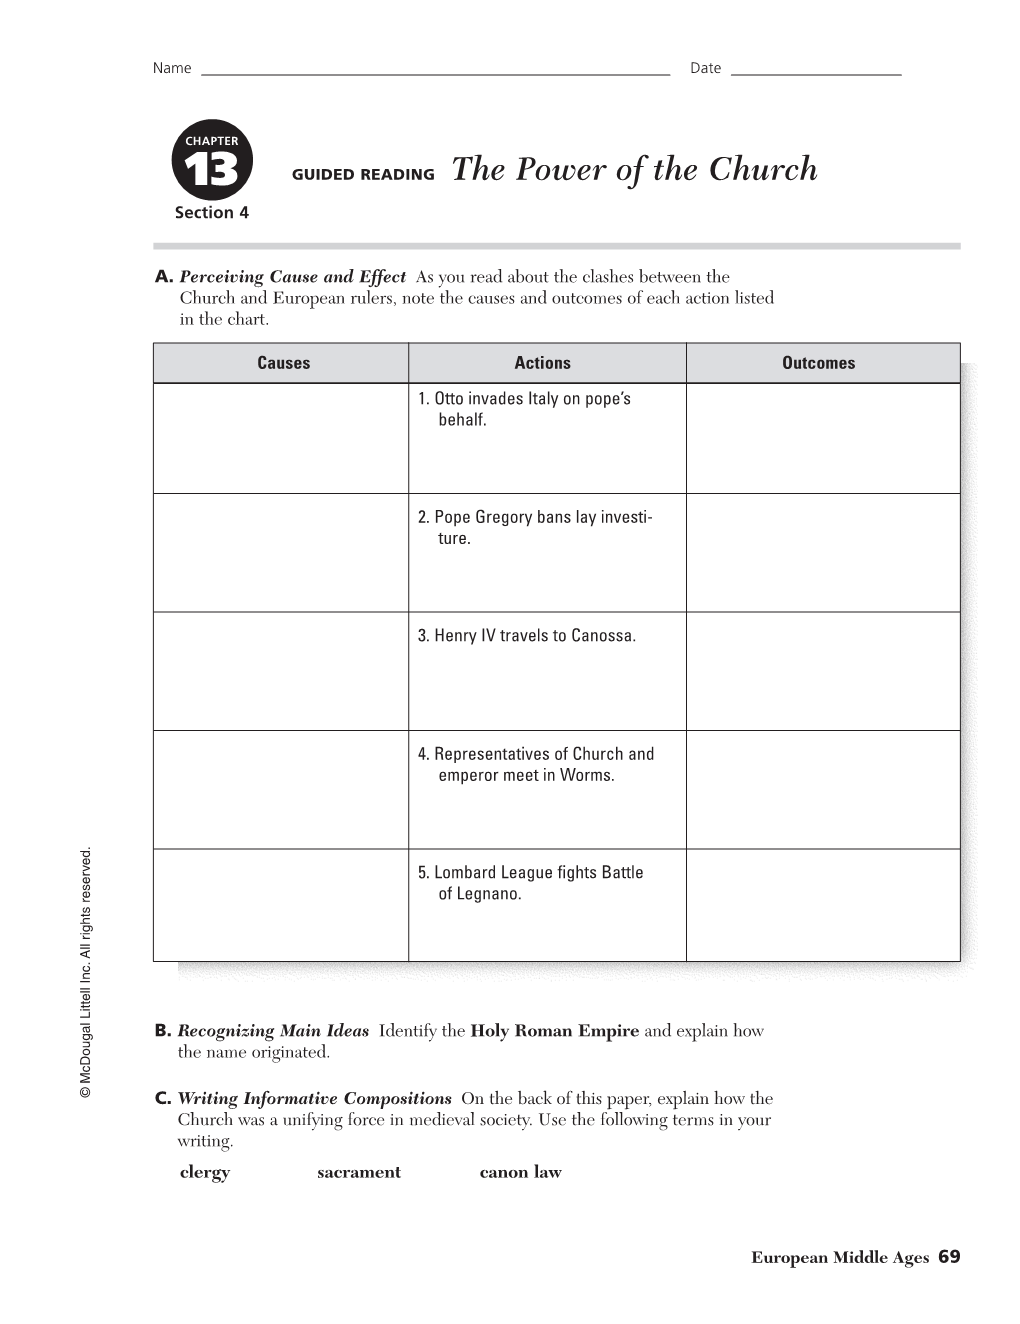 GUIDED READING the Power of the Church Section 4